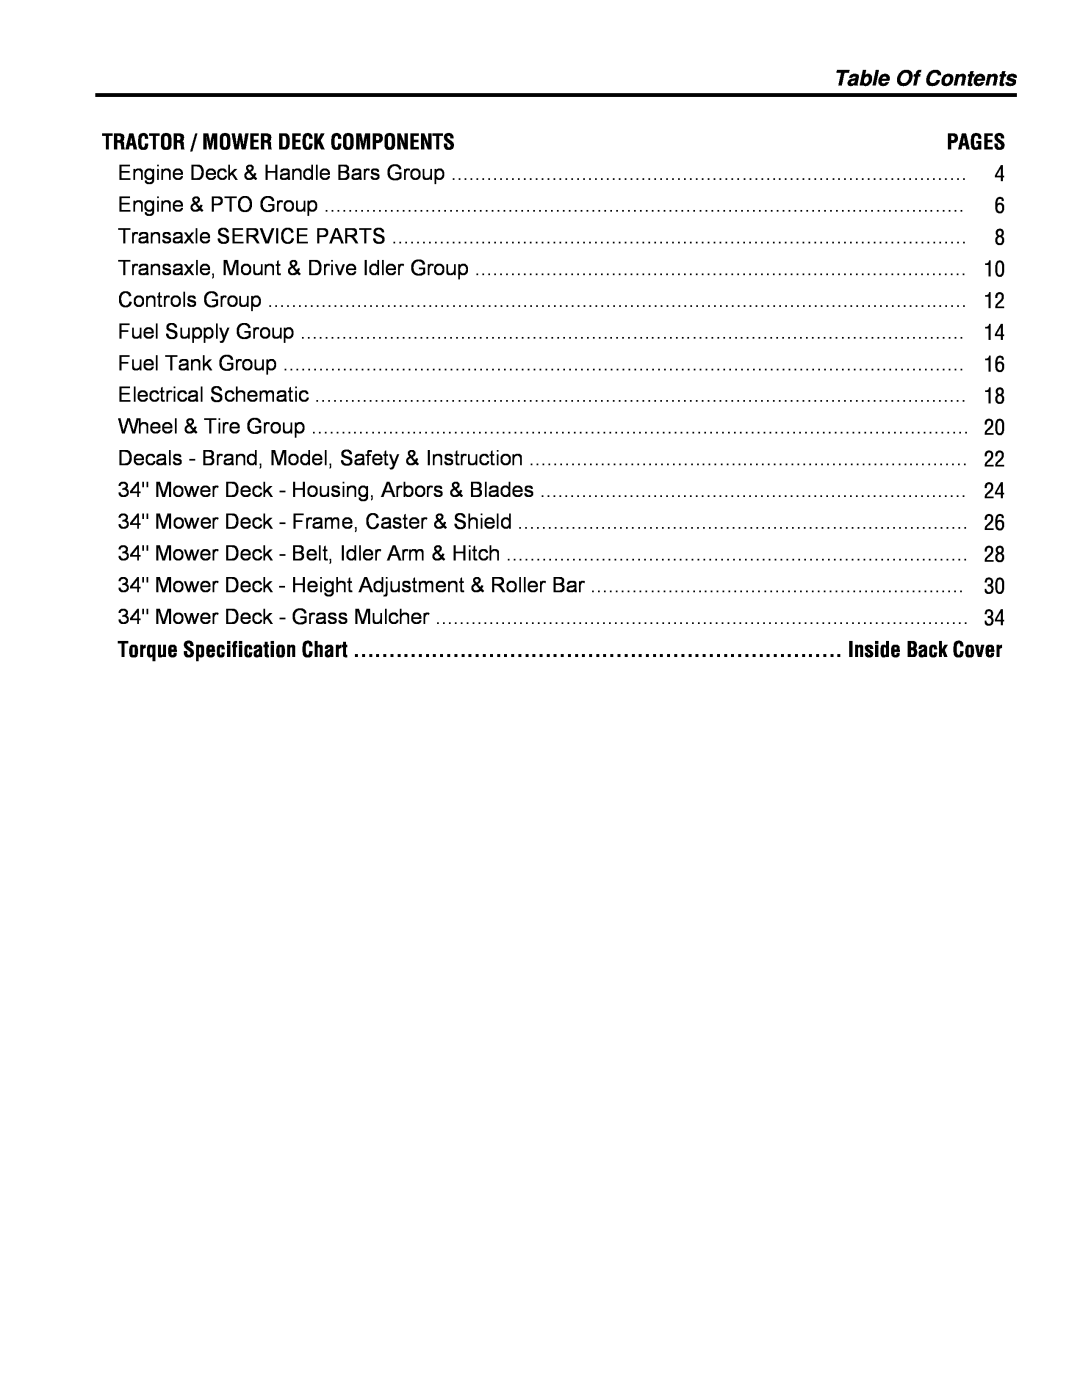 Simplicity Series Transaxle manual Table Of Contents, Tractor / Mower Deck Components, Pages, Torque Specification Chart 